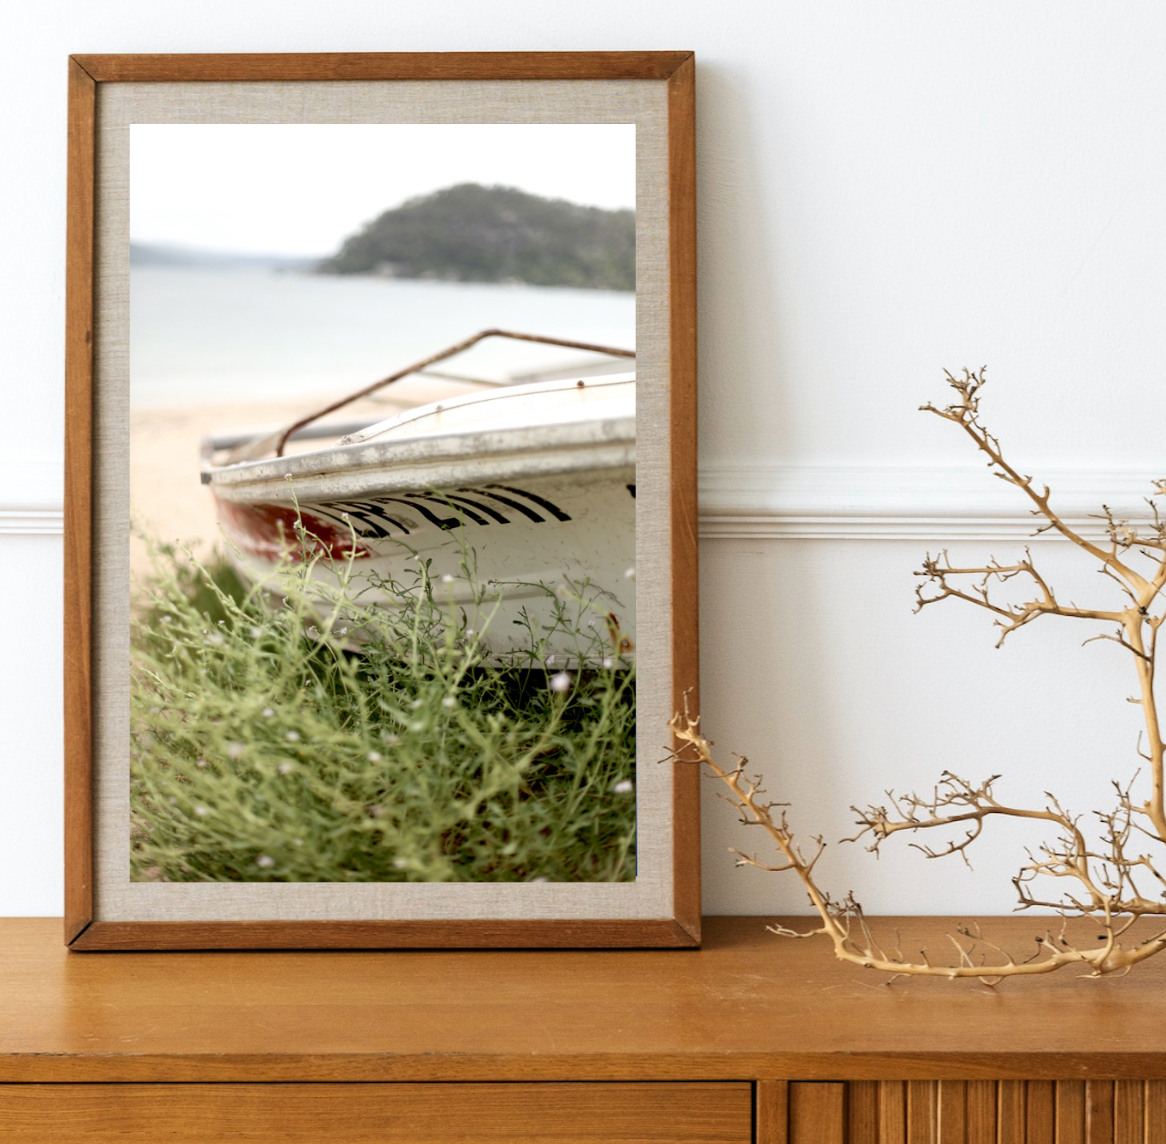 Barrenjoey Boat • Pittwater Palm Beach Photography Print